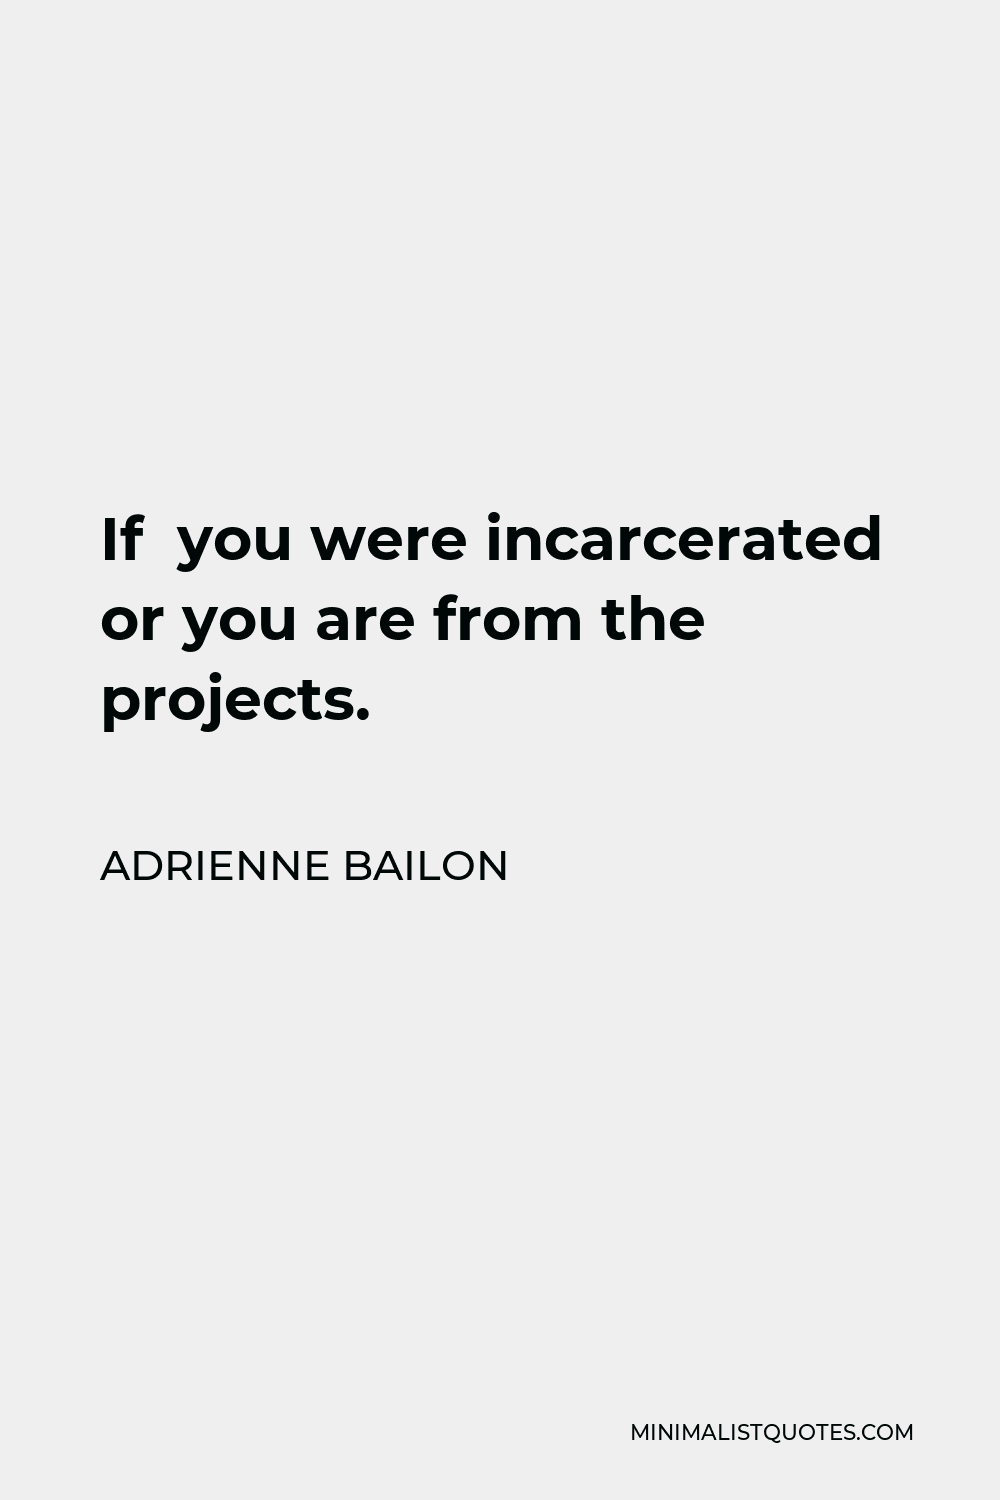 Adrienne Bailon Quote - If you were incarcerated or you are from the projects.